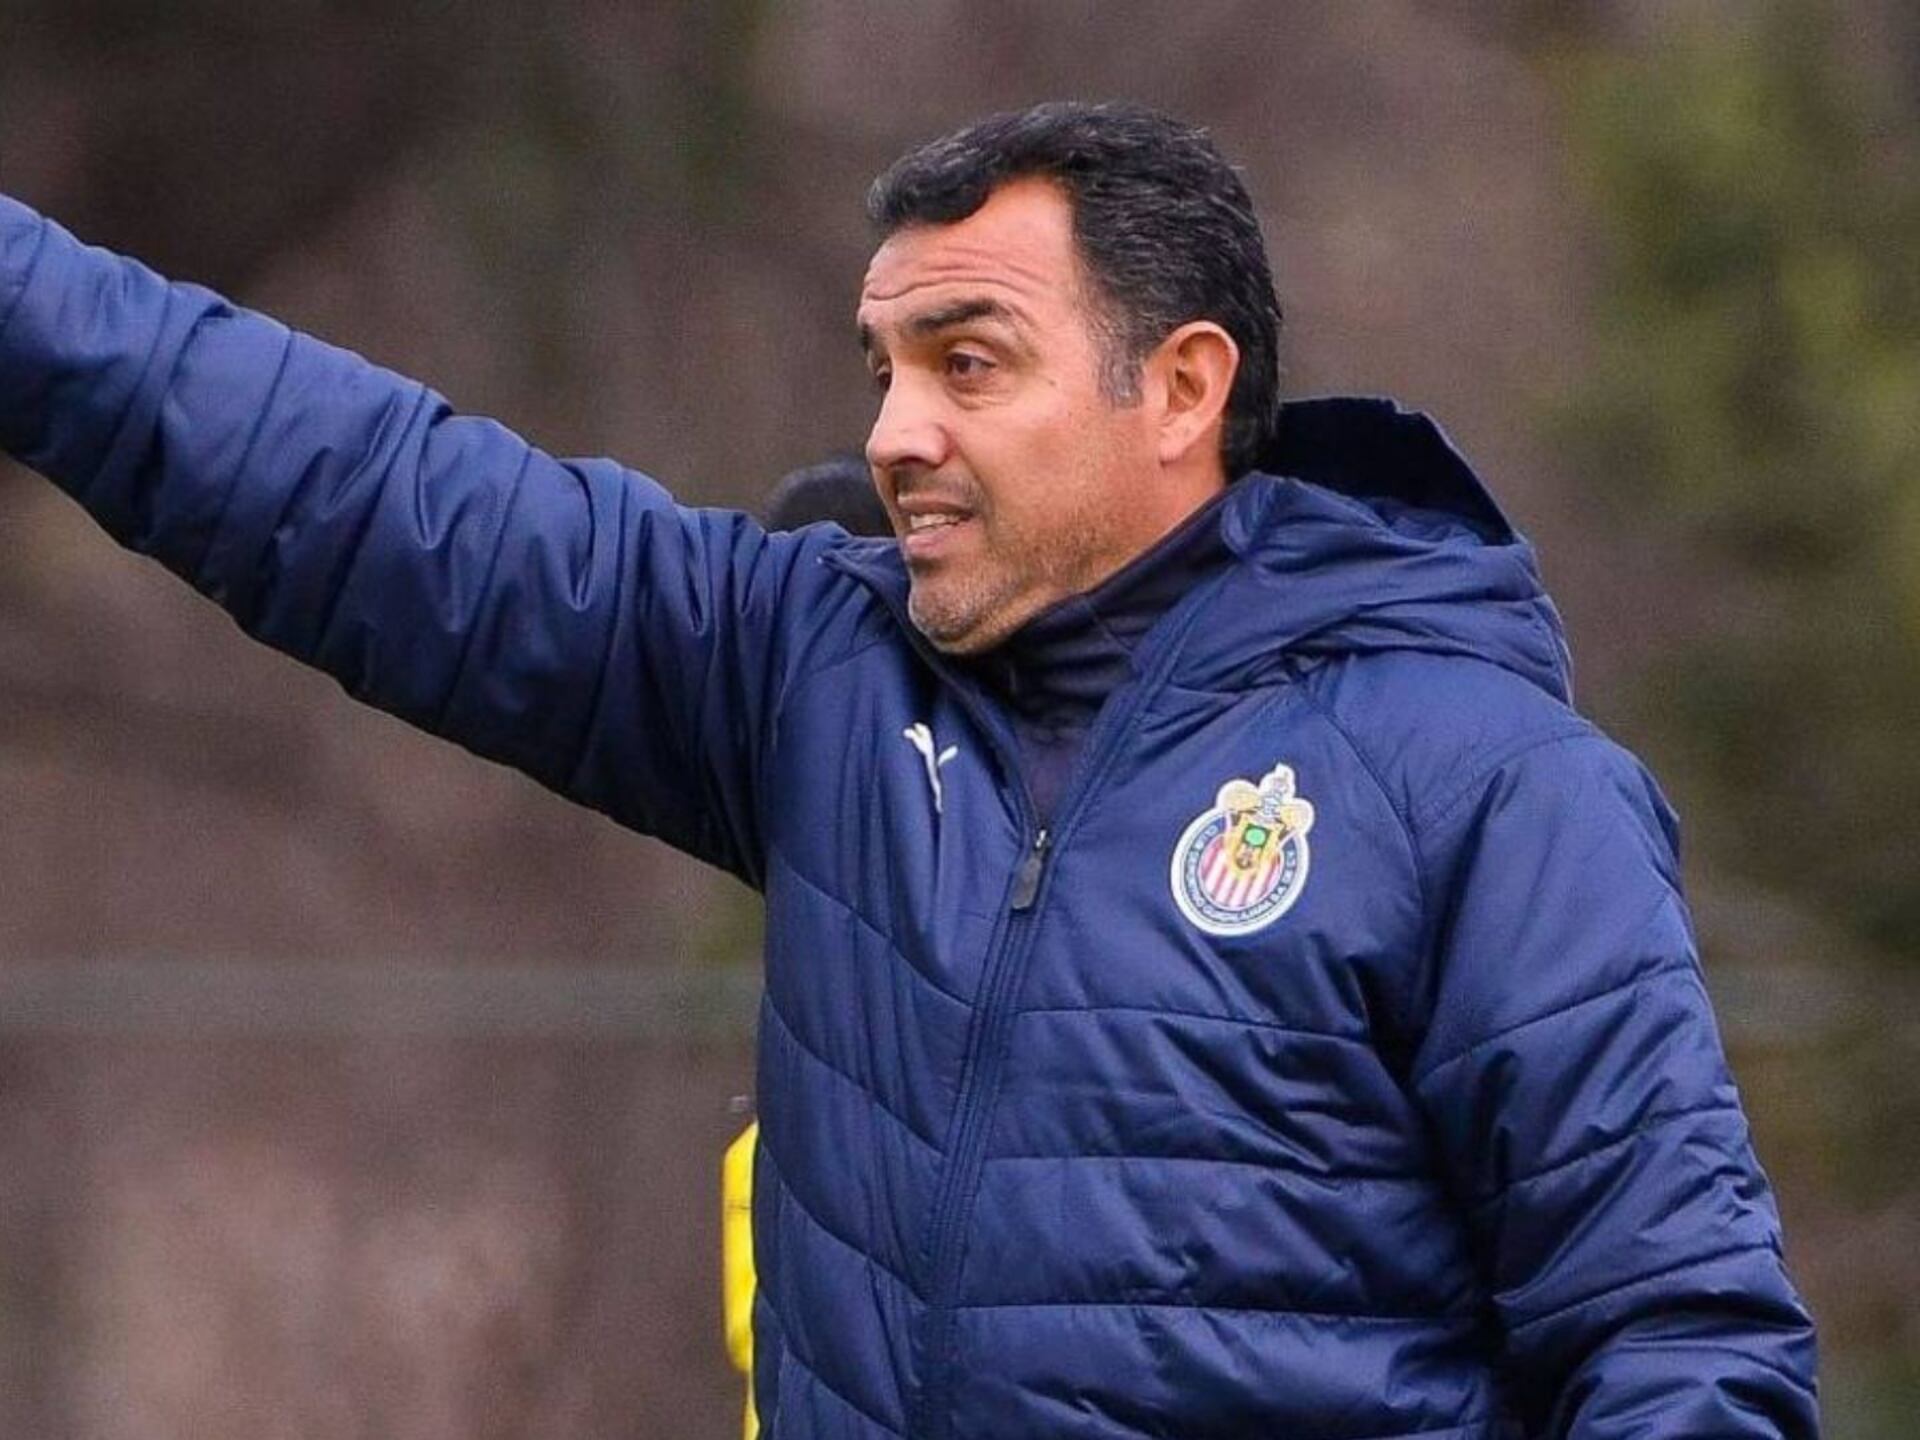 Ricardo Cadena already knows which players will leave the team if he remains as Chivas coach